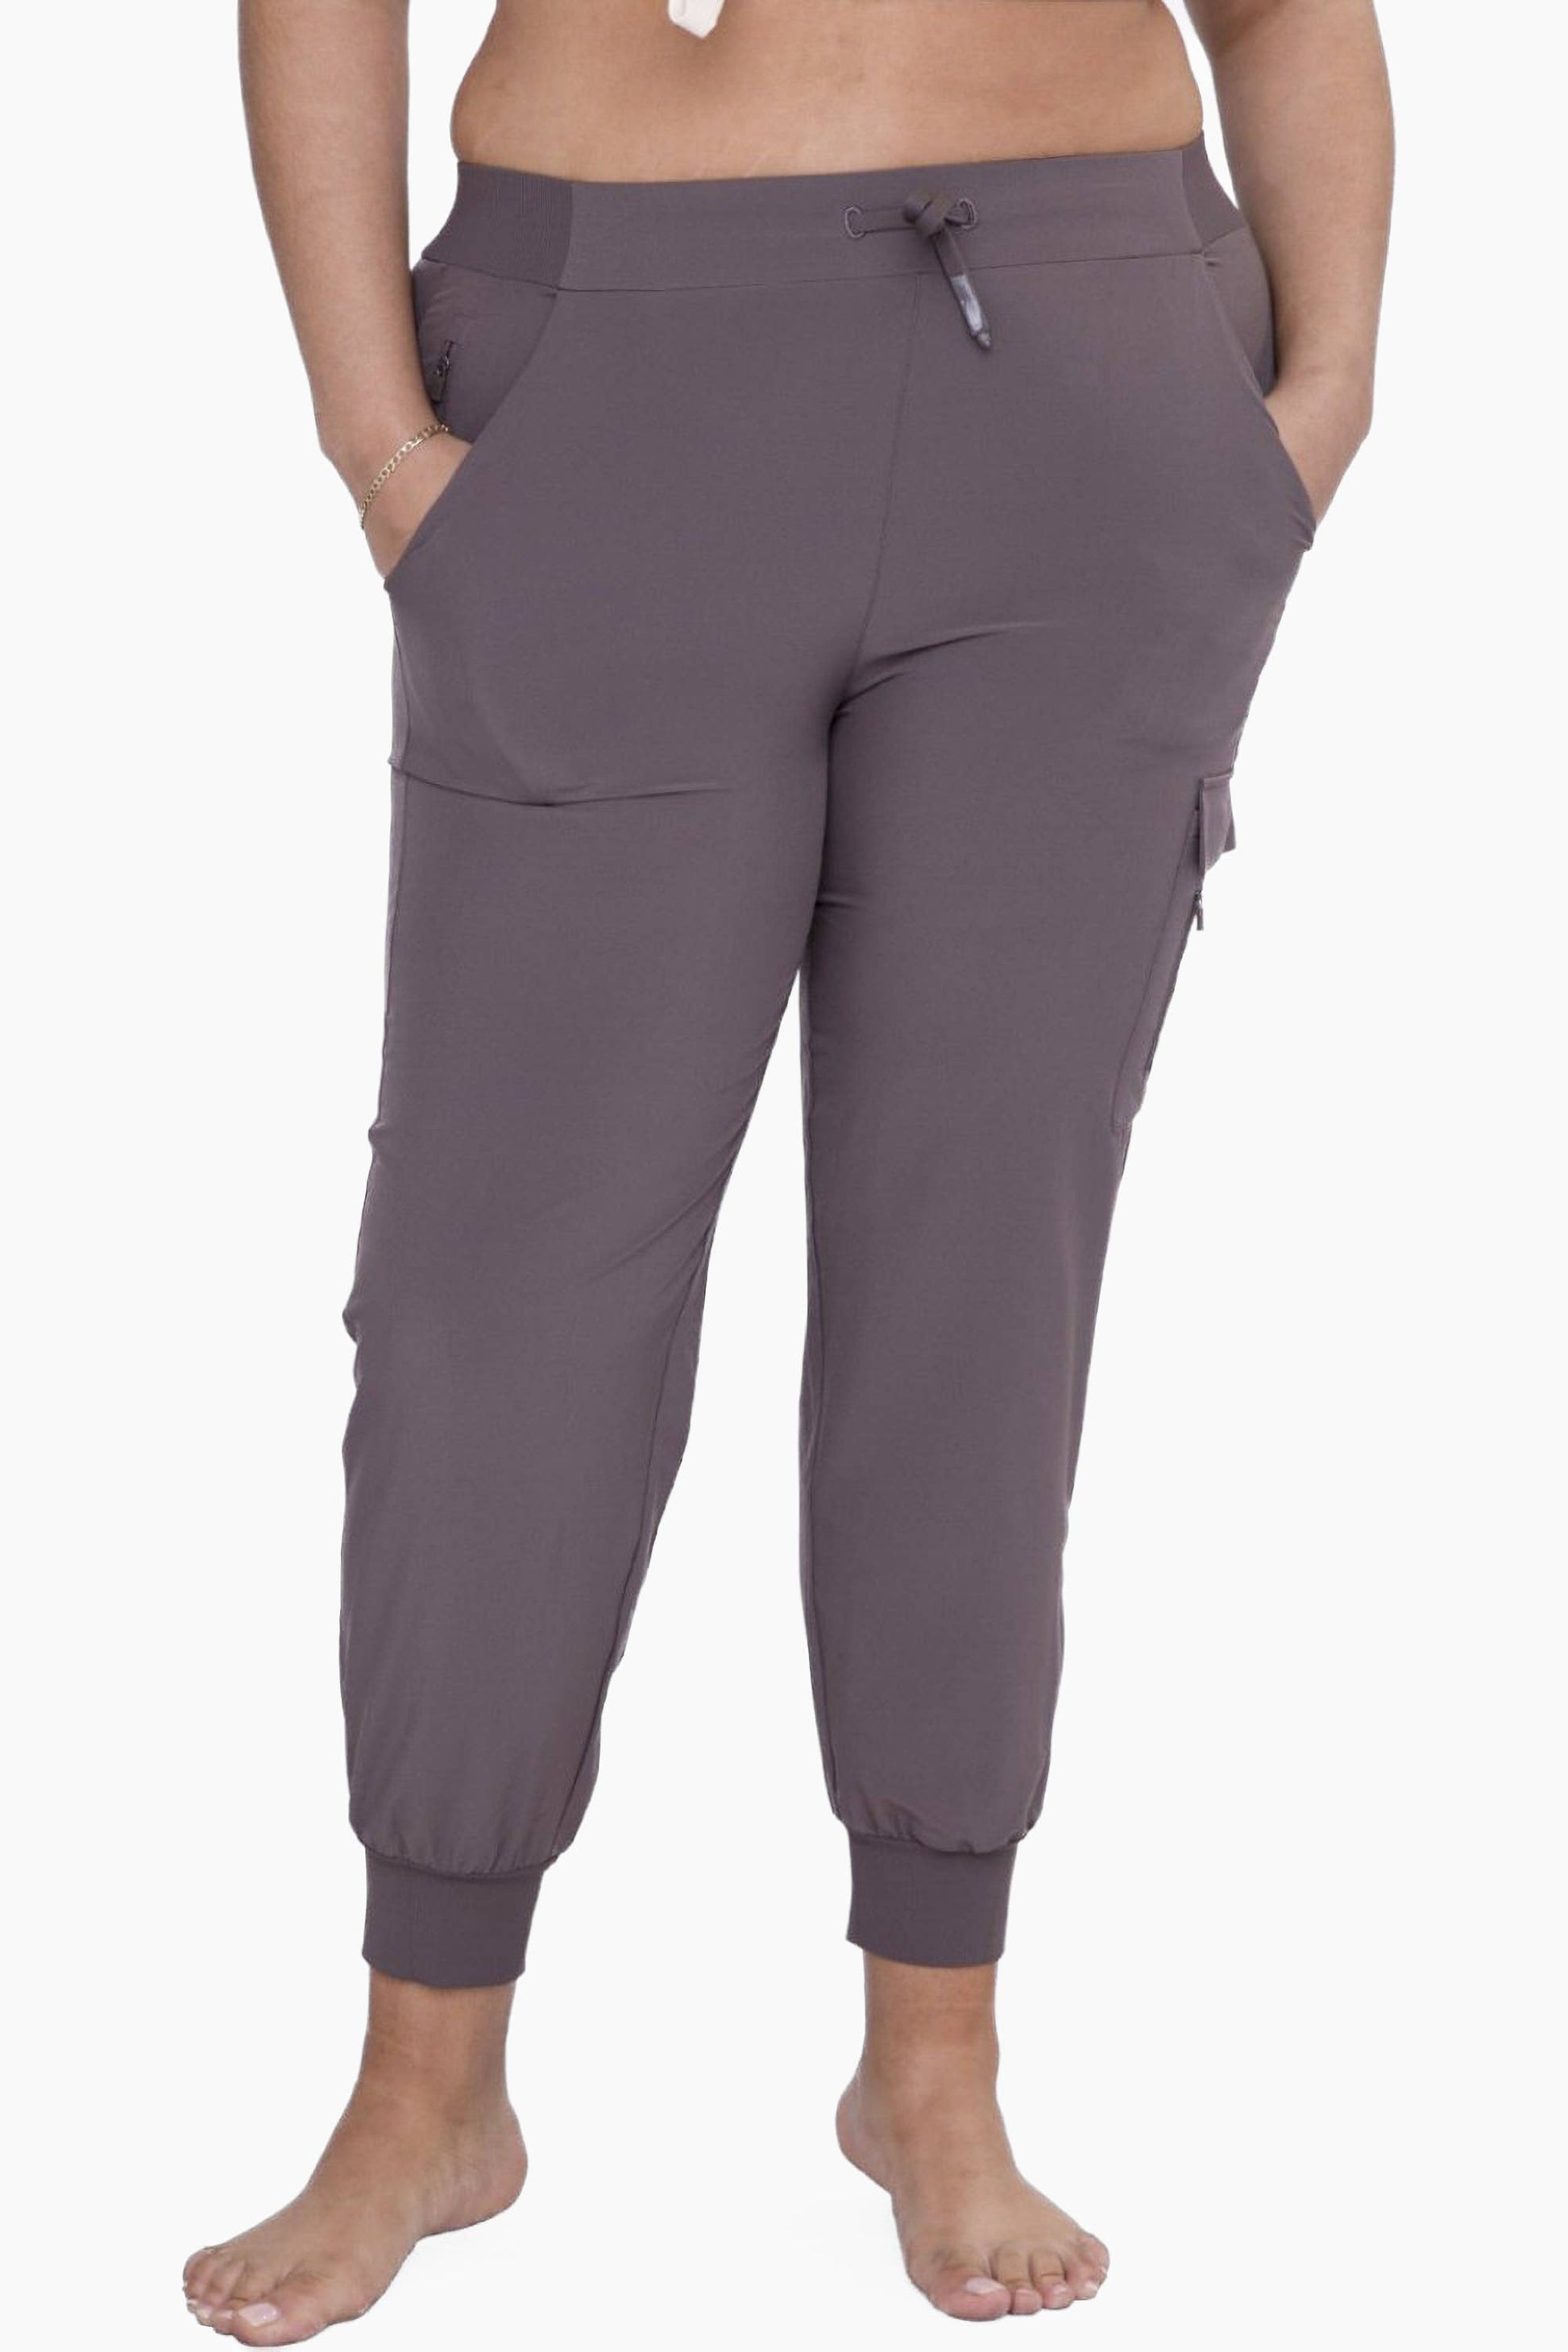 CURVY High-Waisted Capri Active Joggers with Pockets Spring-Summer Mono B